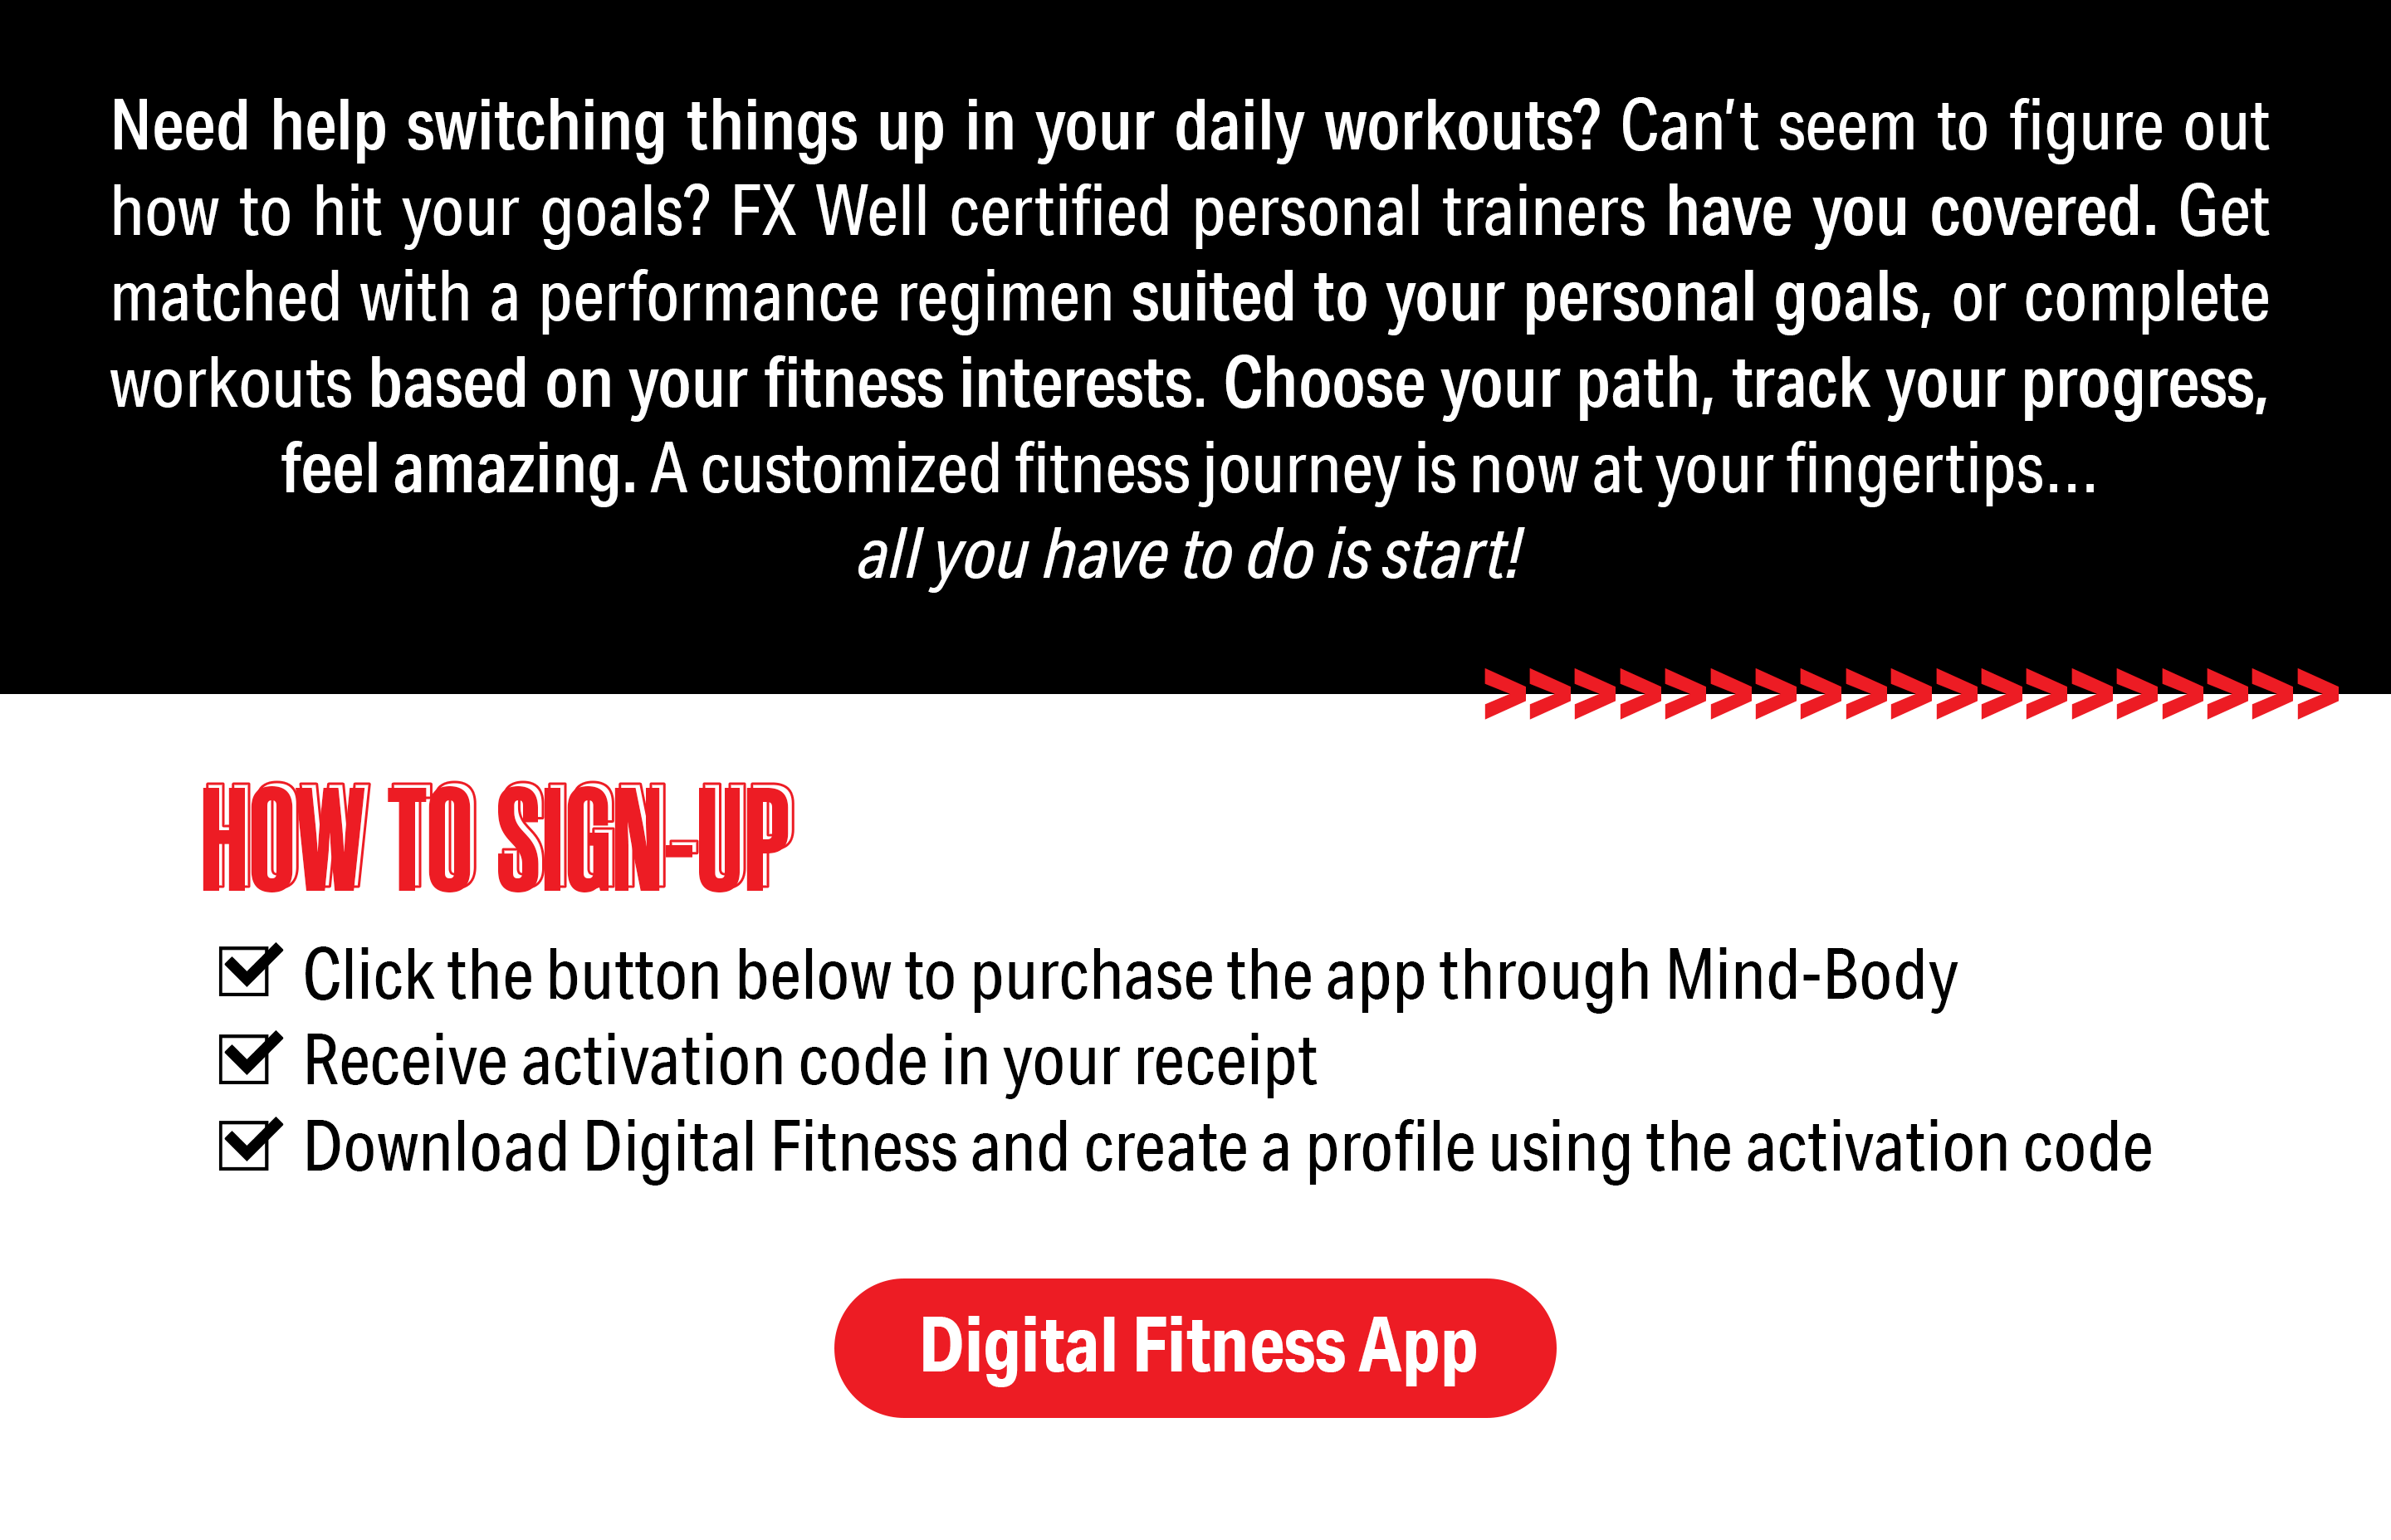 White text that reads "Need help switching things up in your daily workouts? Can't seem to figure out how to hit your goals? FX Well certified personal trainers have you covered. Get matched with a performance regimen suited to your personal goals, or complete workouts based on your fitness interests. Choose your path, track your progress, feel amazing. A customized fitness journey is now at your fingertips... all you have to do is start!" Red text that reads "How to sign up- 1. Click the button below to purchase the app through Mind-Body. 2. Receive activation code in your receipt. 3. Download Digital Fitness to create a profile using the activation code." Red button that reads "Digital Fitness App"